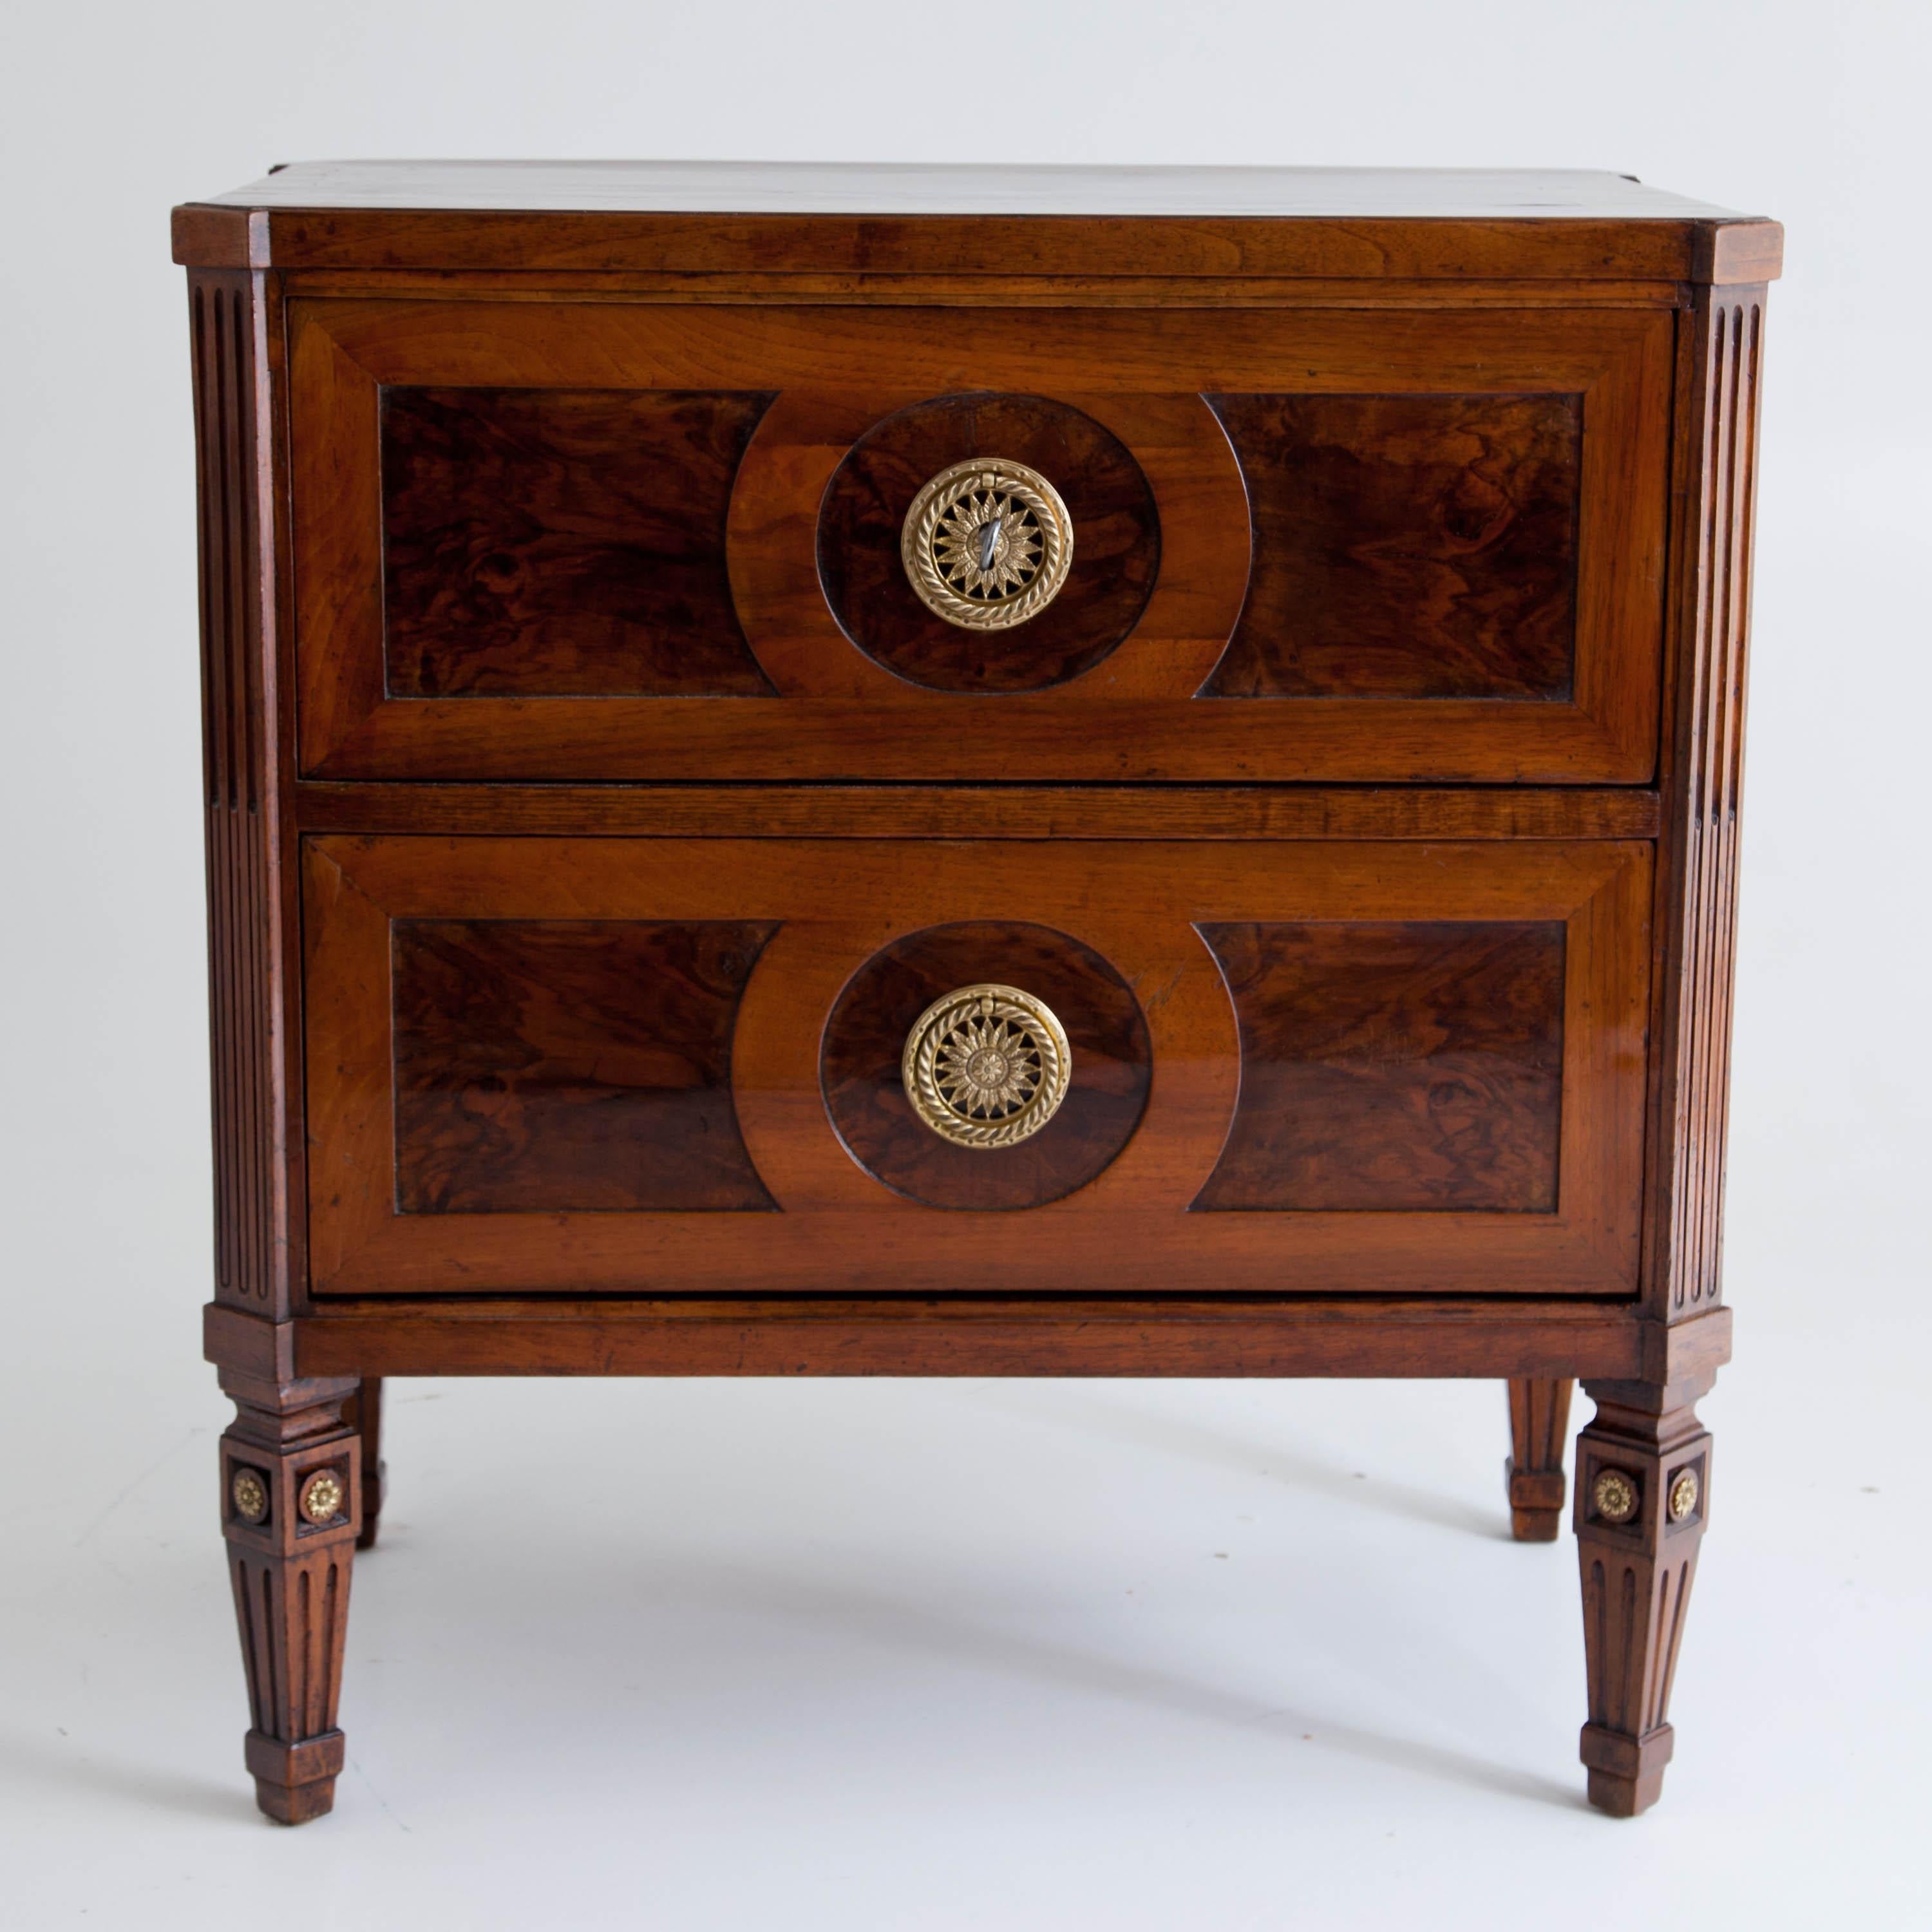 Small two-drawered chest of drawers on fluted square pointed feet with fire-gilt rosette decoration. The bevelled pilaster-shaped corners show fluting and pipes. Filling panels on the front and sides in walnut root wood. The fronts of the drawers